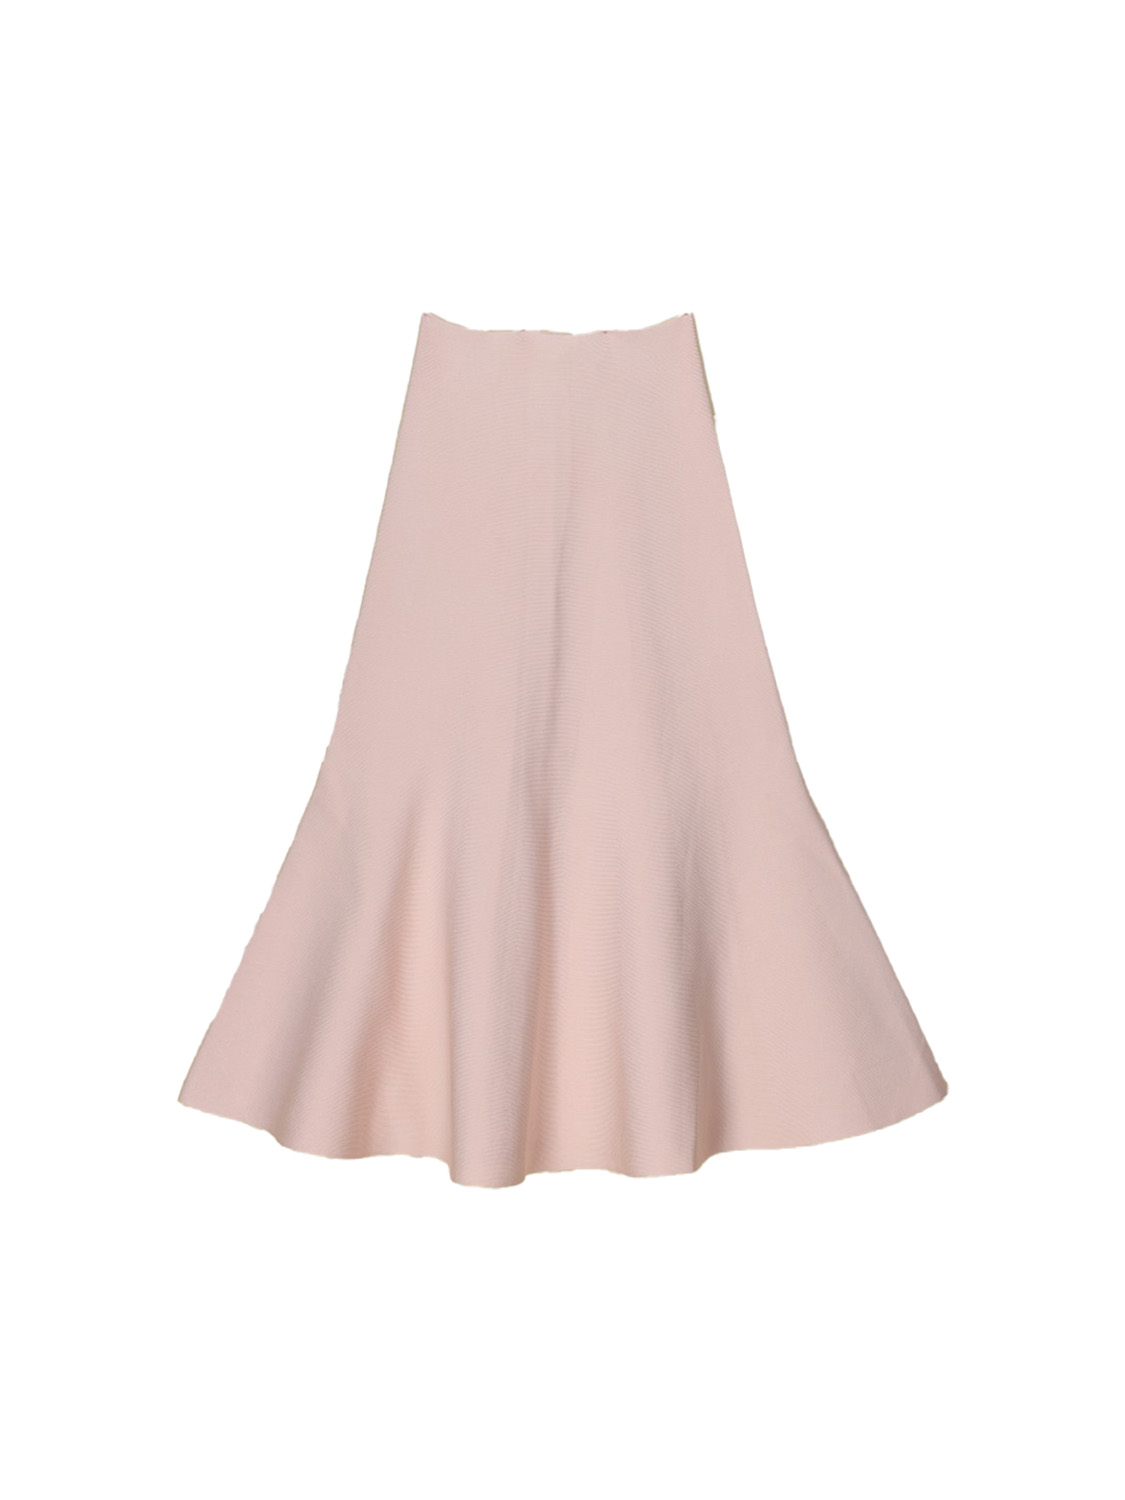 Flared skirt - stretchy A-line skirt with a flared hemline 